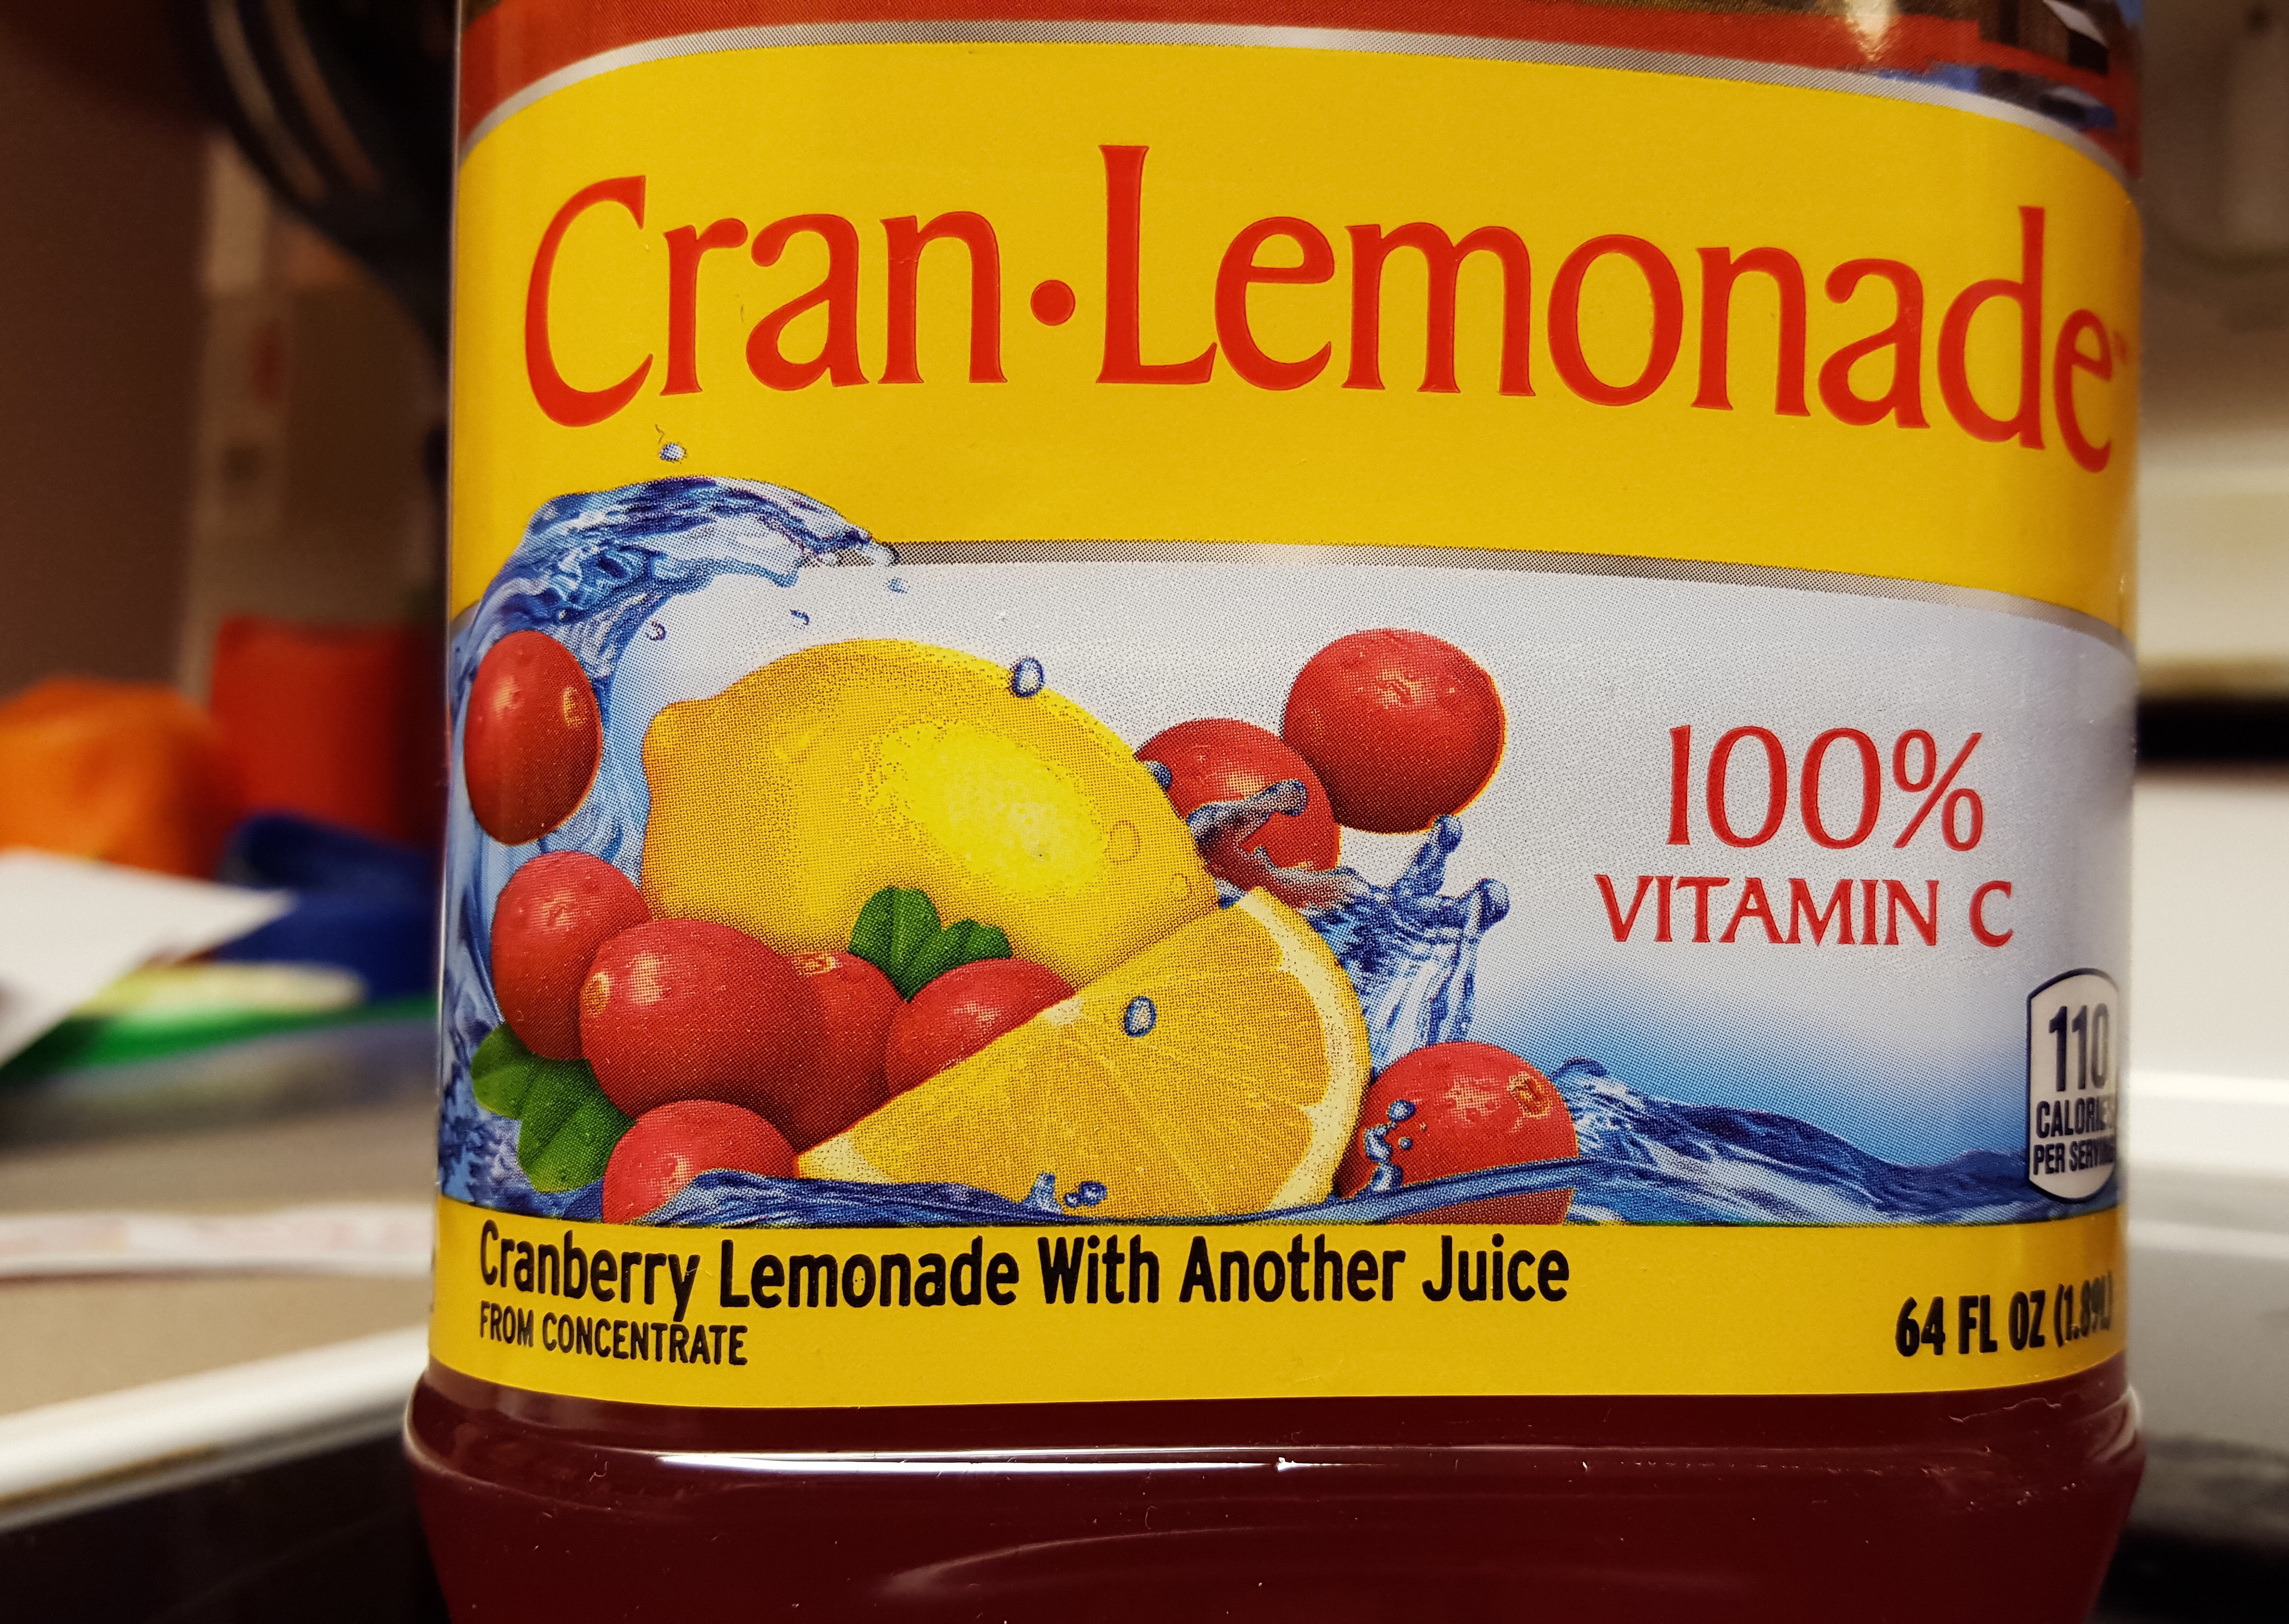 Cranberry Lemonade With Another Juice